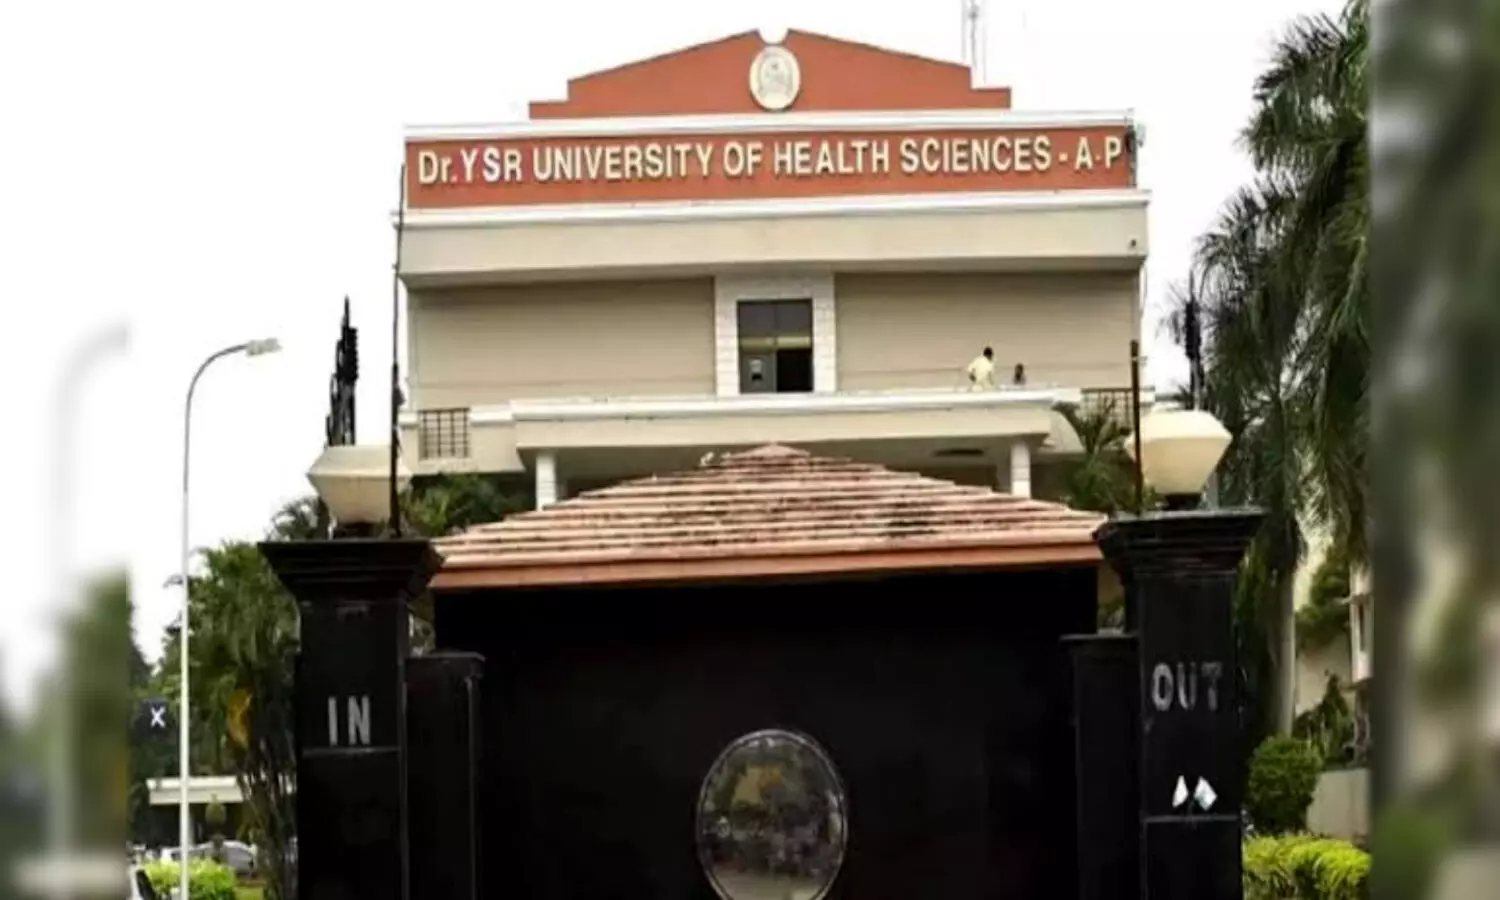 Surprise check? Really? Dr YSR University of Health Sciences gives advance notice of it